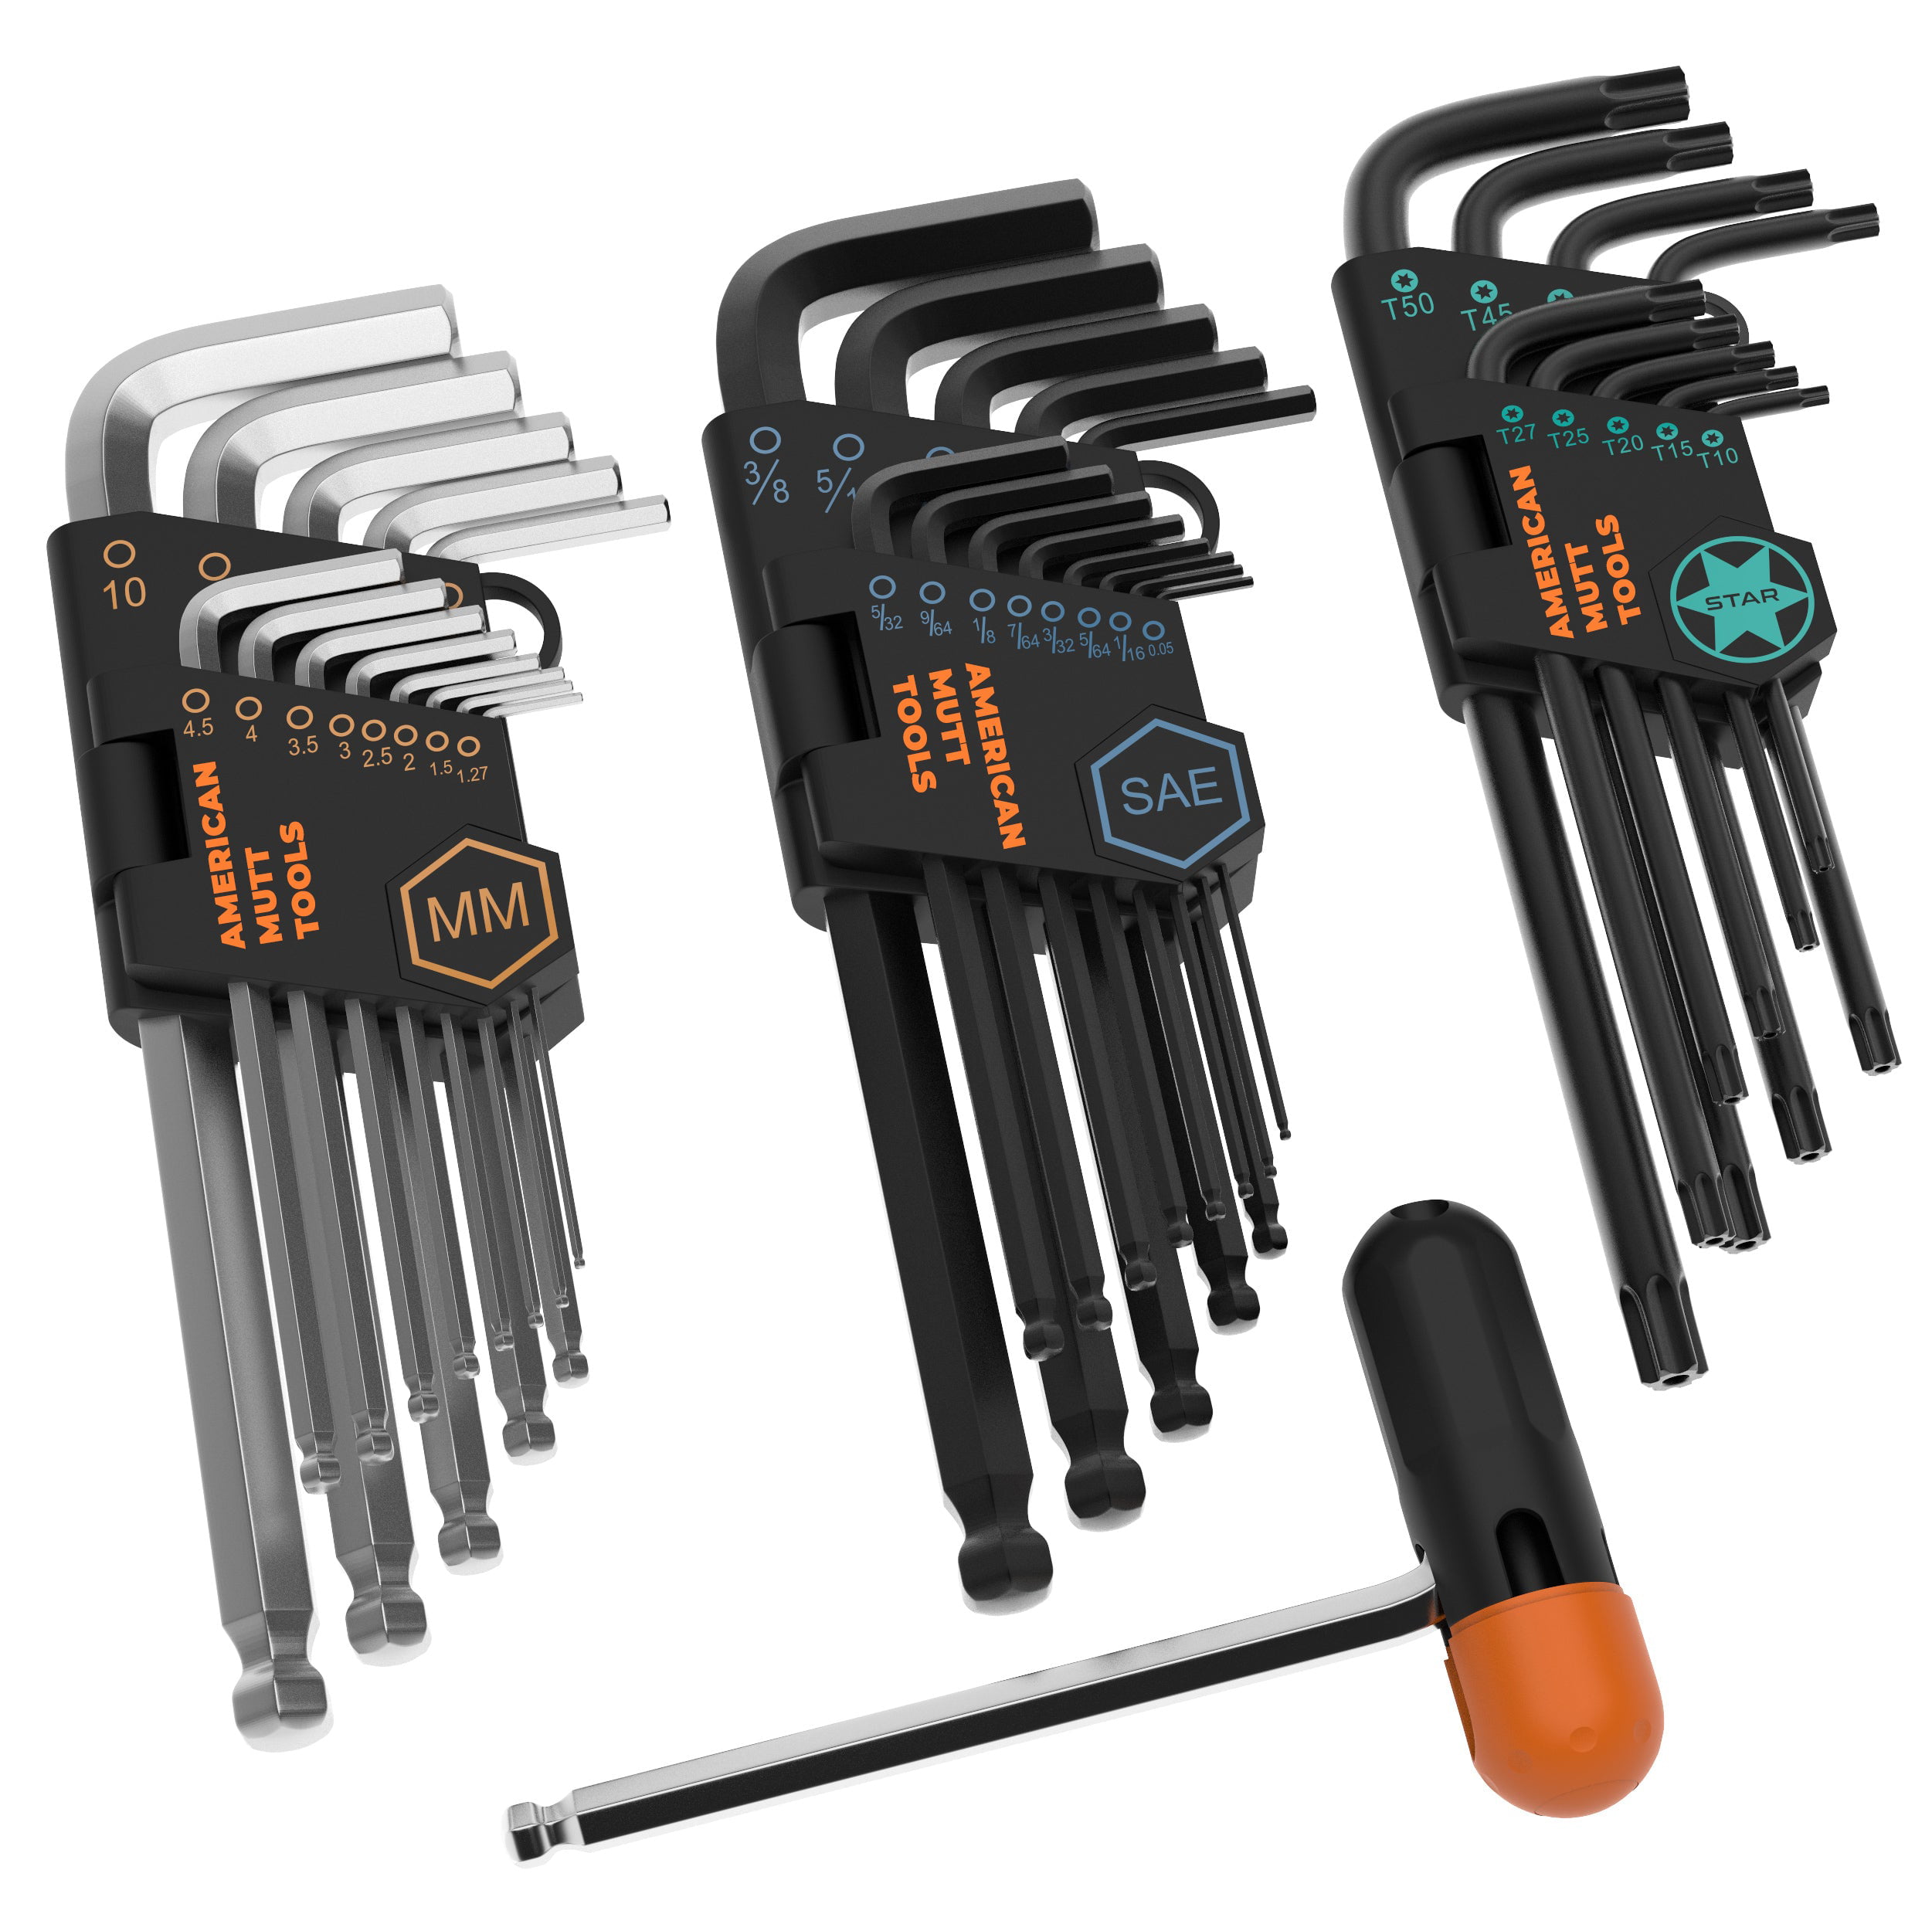 10 pc T Handle Type Hex Key Wrench Set Metric Sizes Allen Wrench MM set